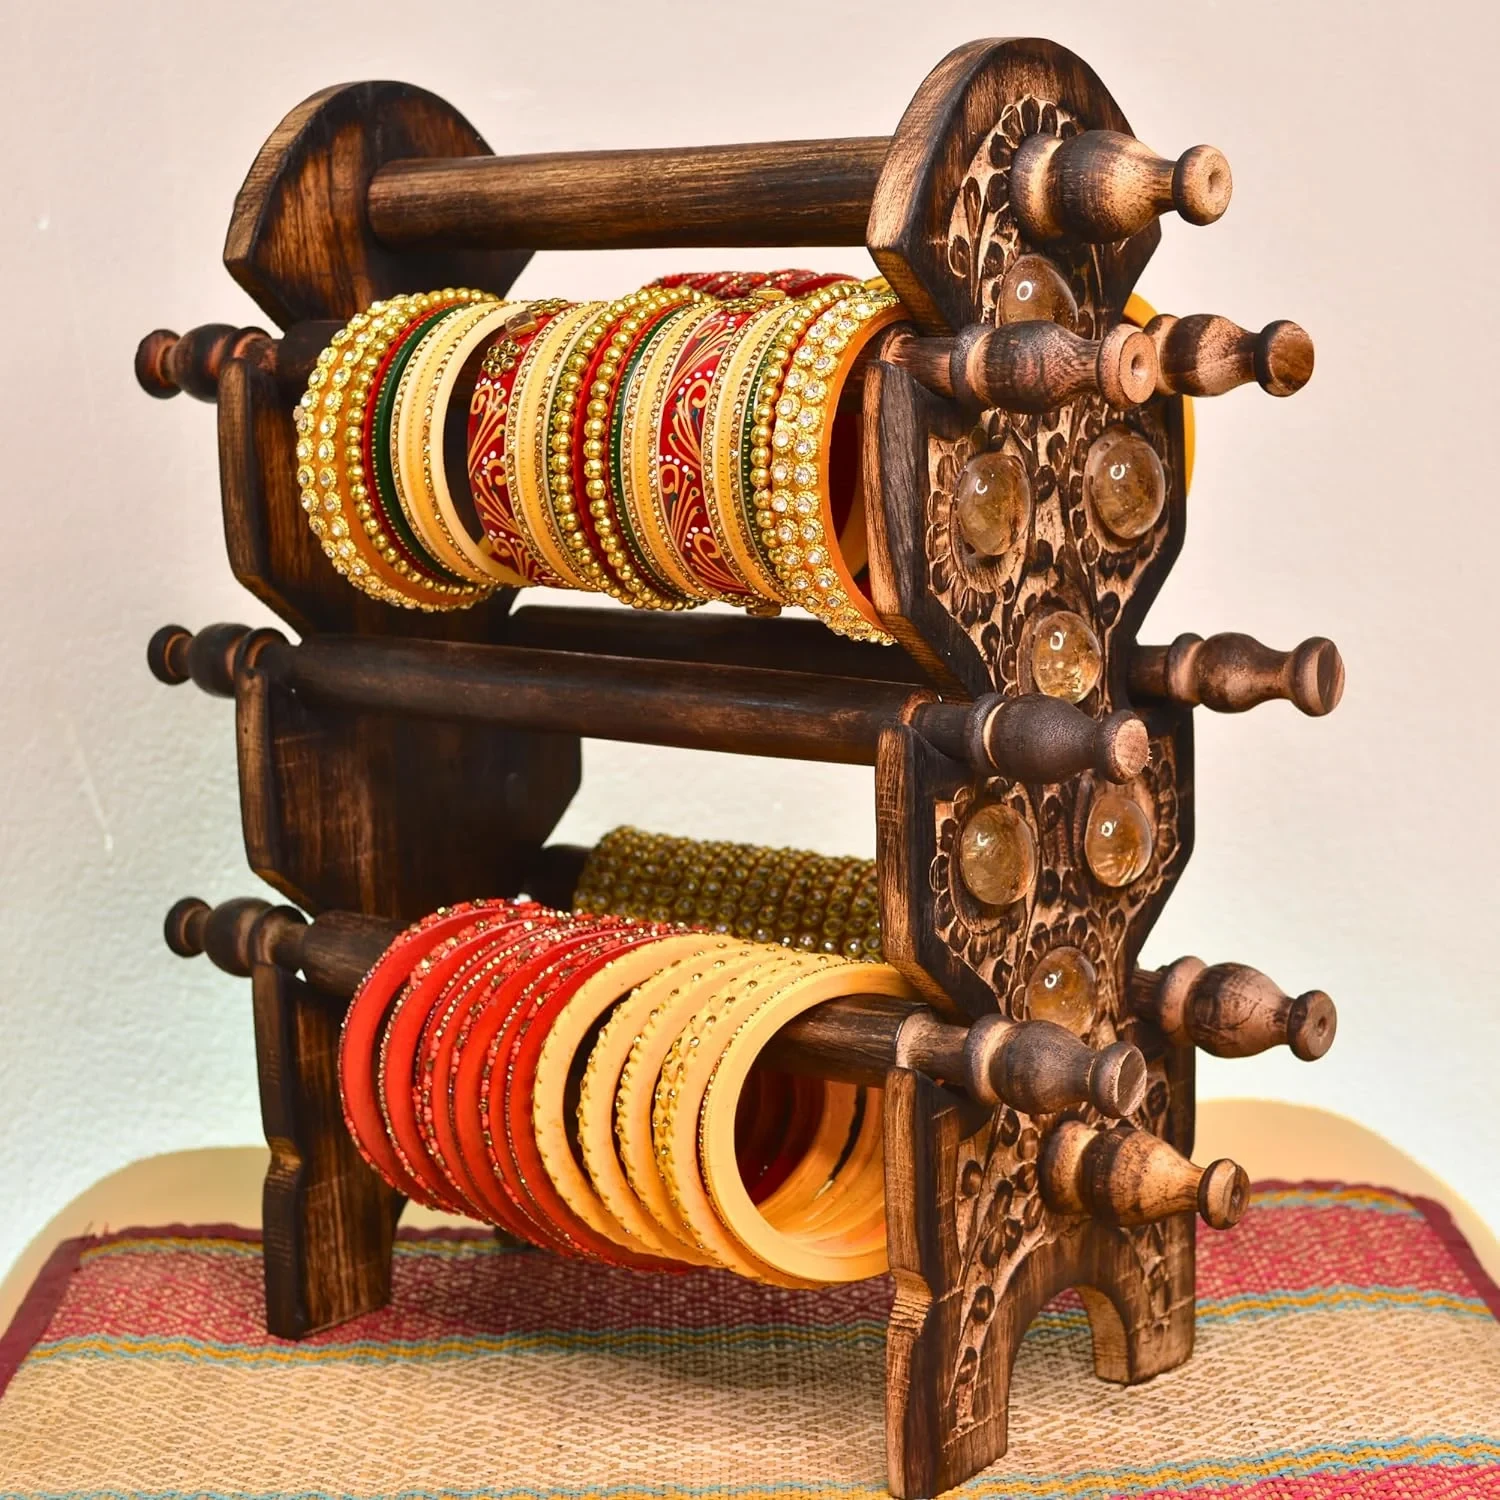 Santarms Wooden Bangle Stand Best For Home Decor Made In India Women Gift To Your Loved One Bangles Or Chudi/Churi | Holder 6 Removable Rods